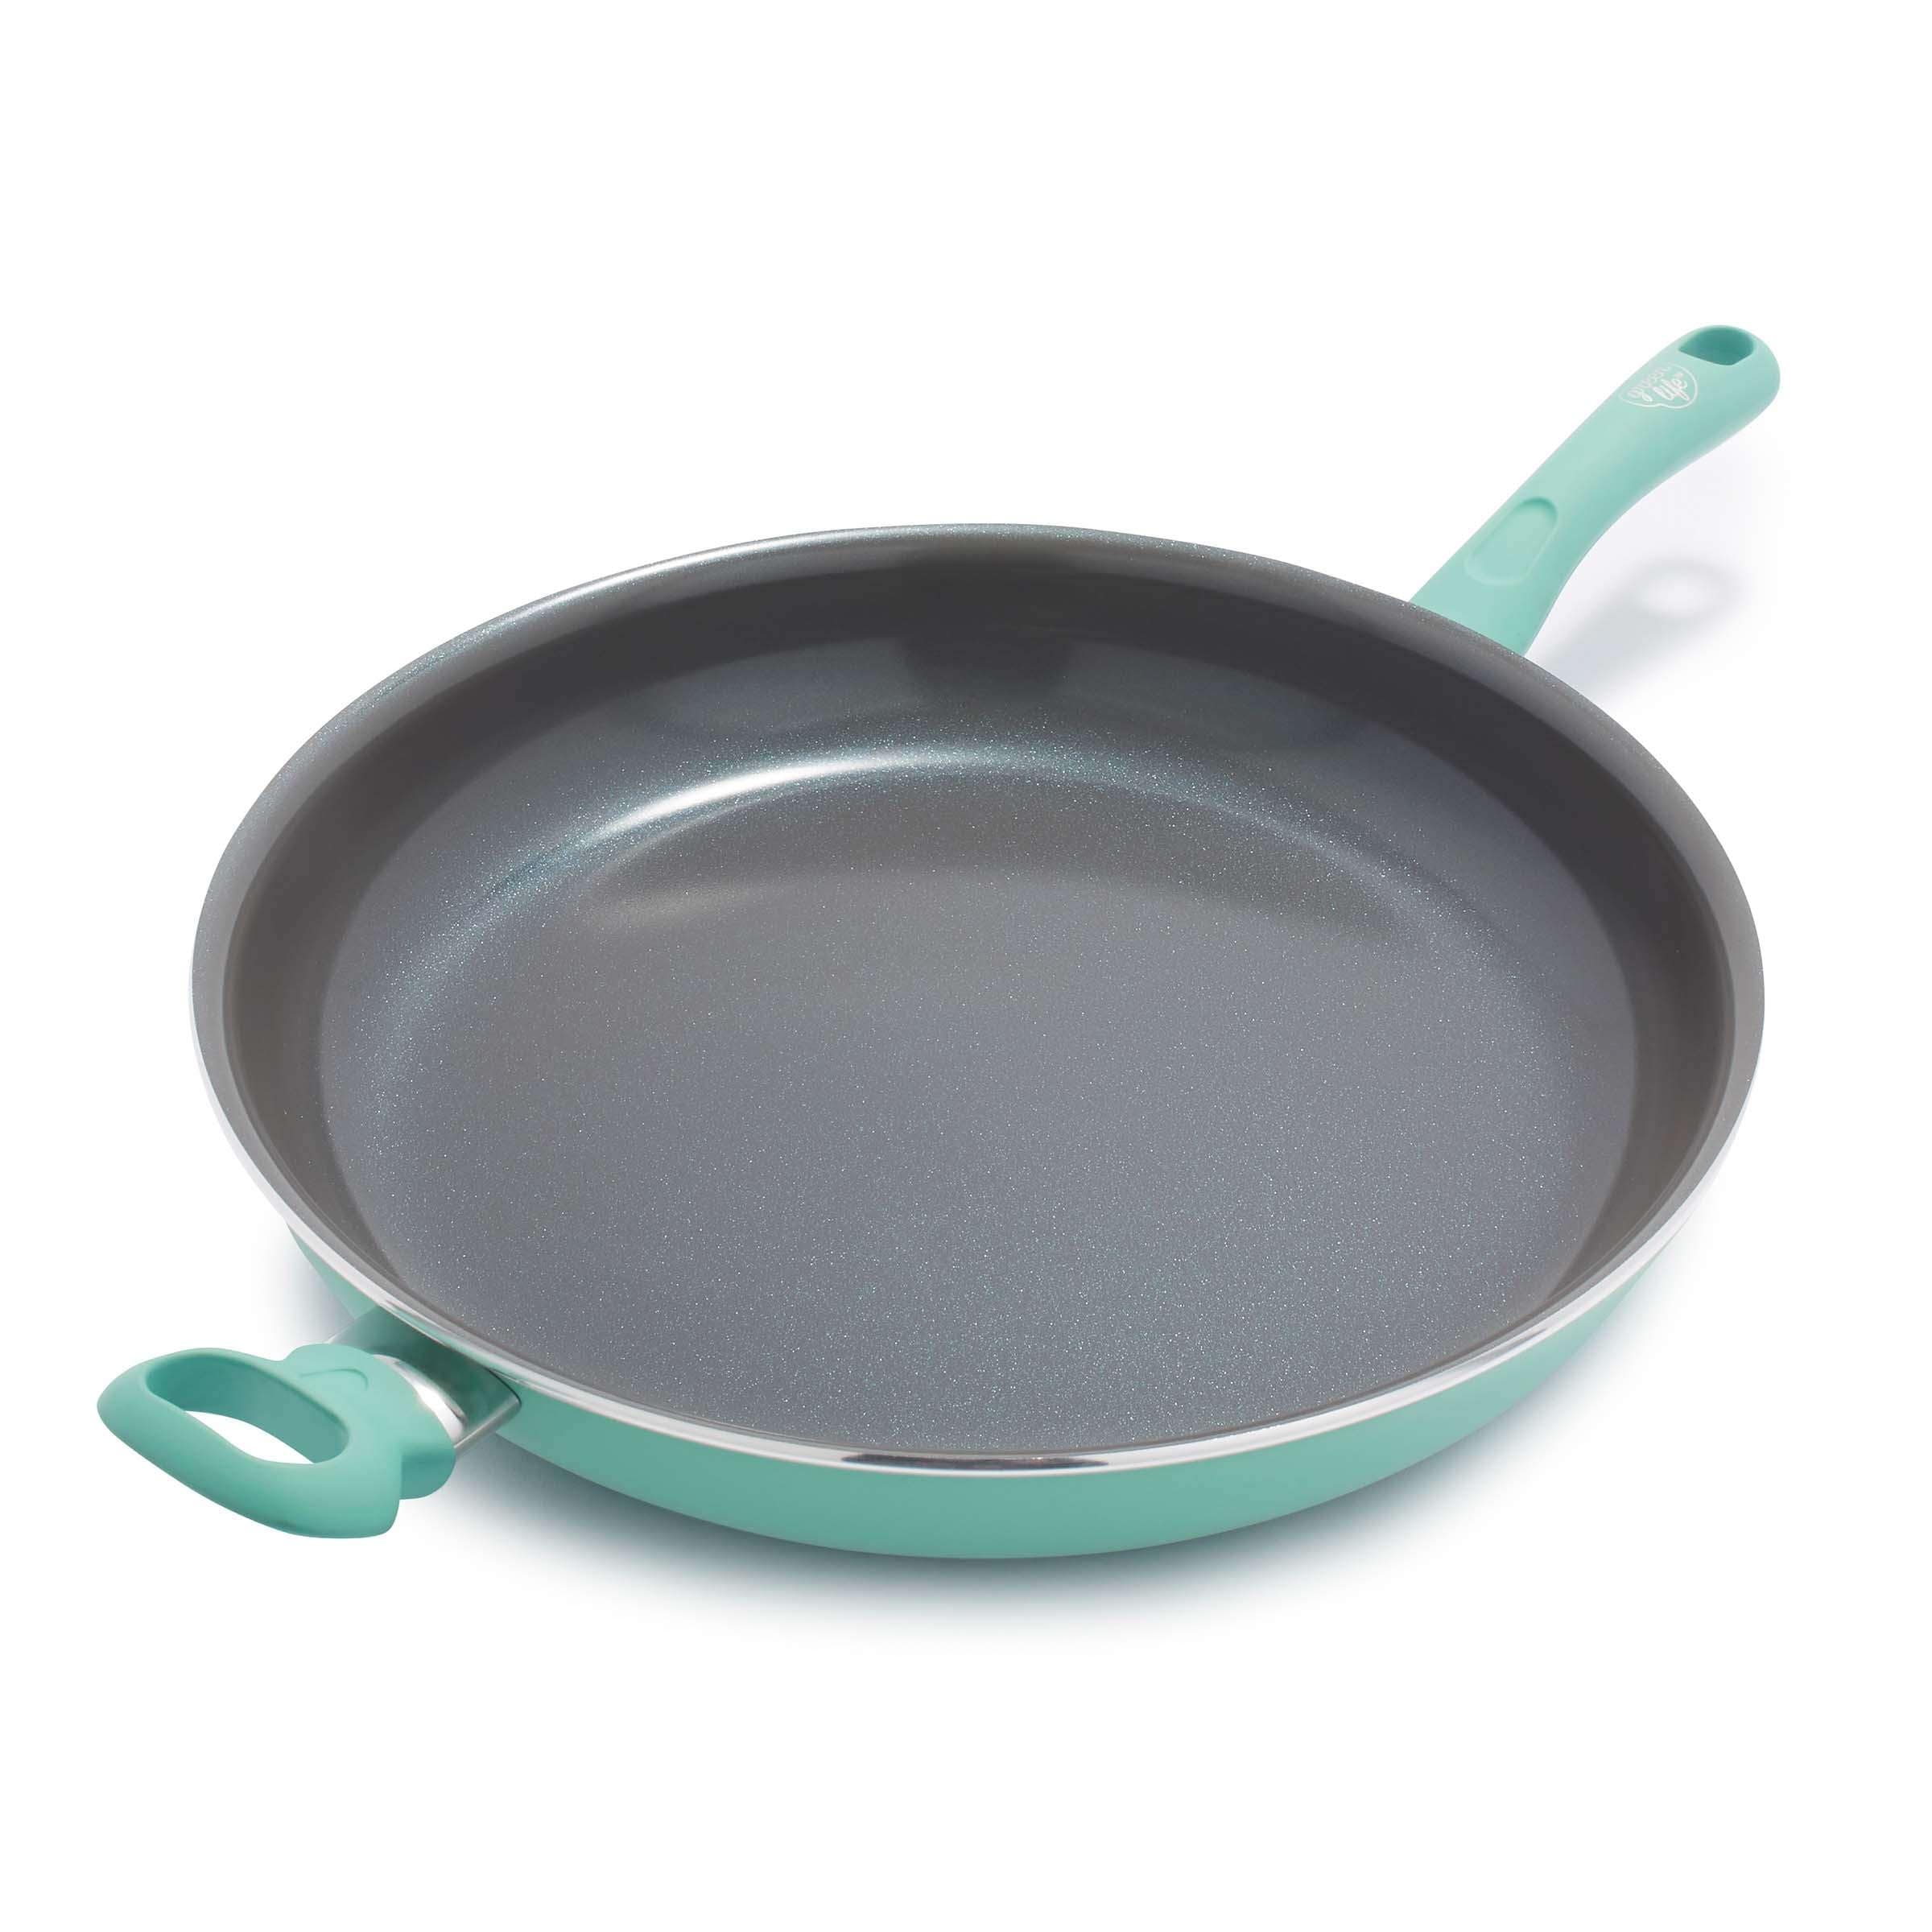 https://ak1.ostkcdn.com/images/products/is/images/direct/3ce5266308dc7401d429ac527ce82149af6e227d/GreenLife-Savory-13.5%22-Frypan.jpg